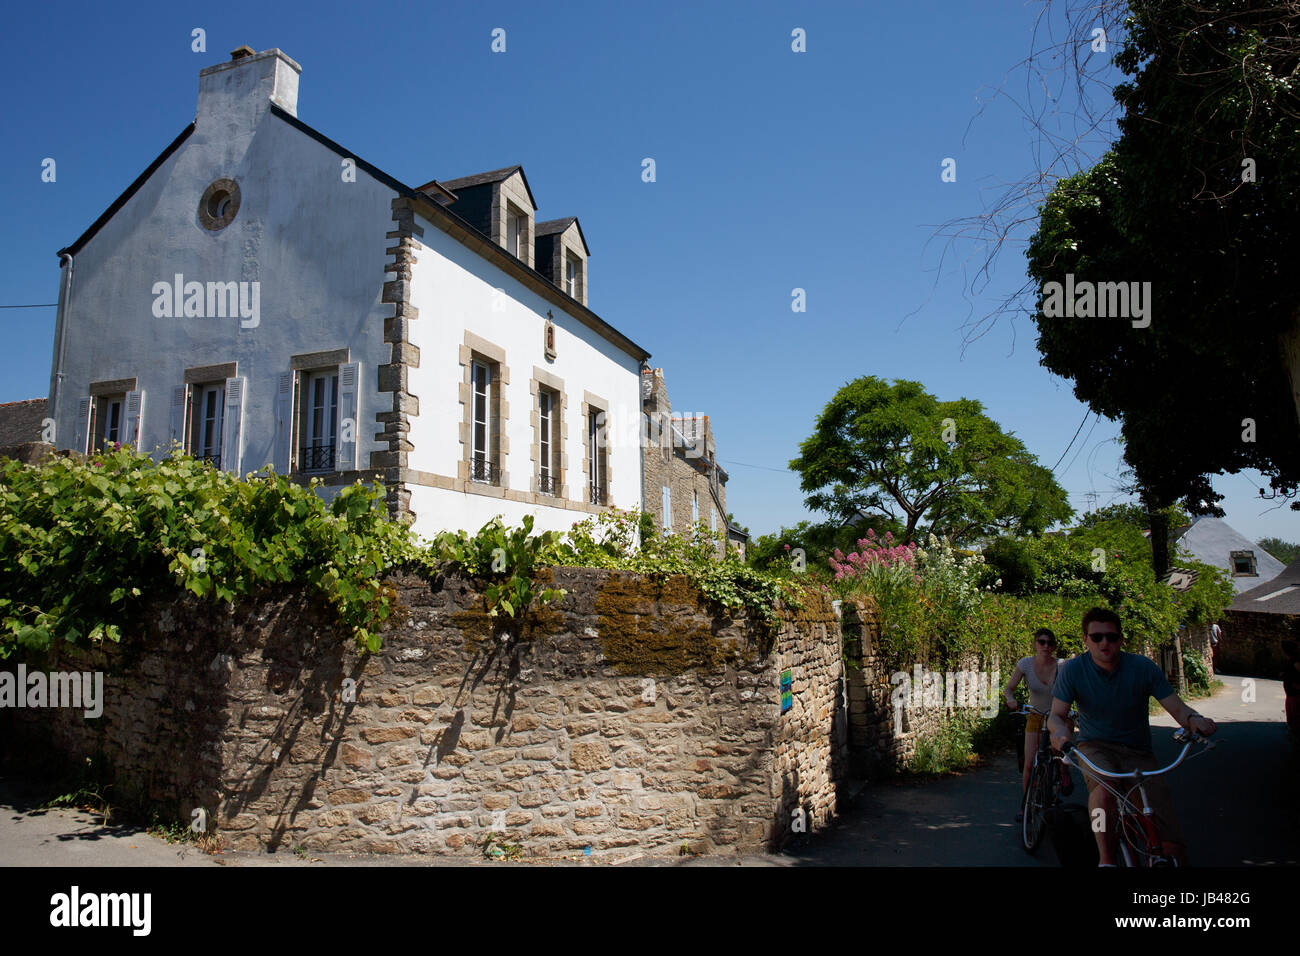 House, country lane, bicyclists, Ile aux Moines, Brittany, France Stock Photo